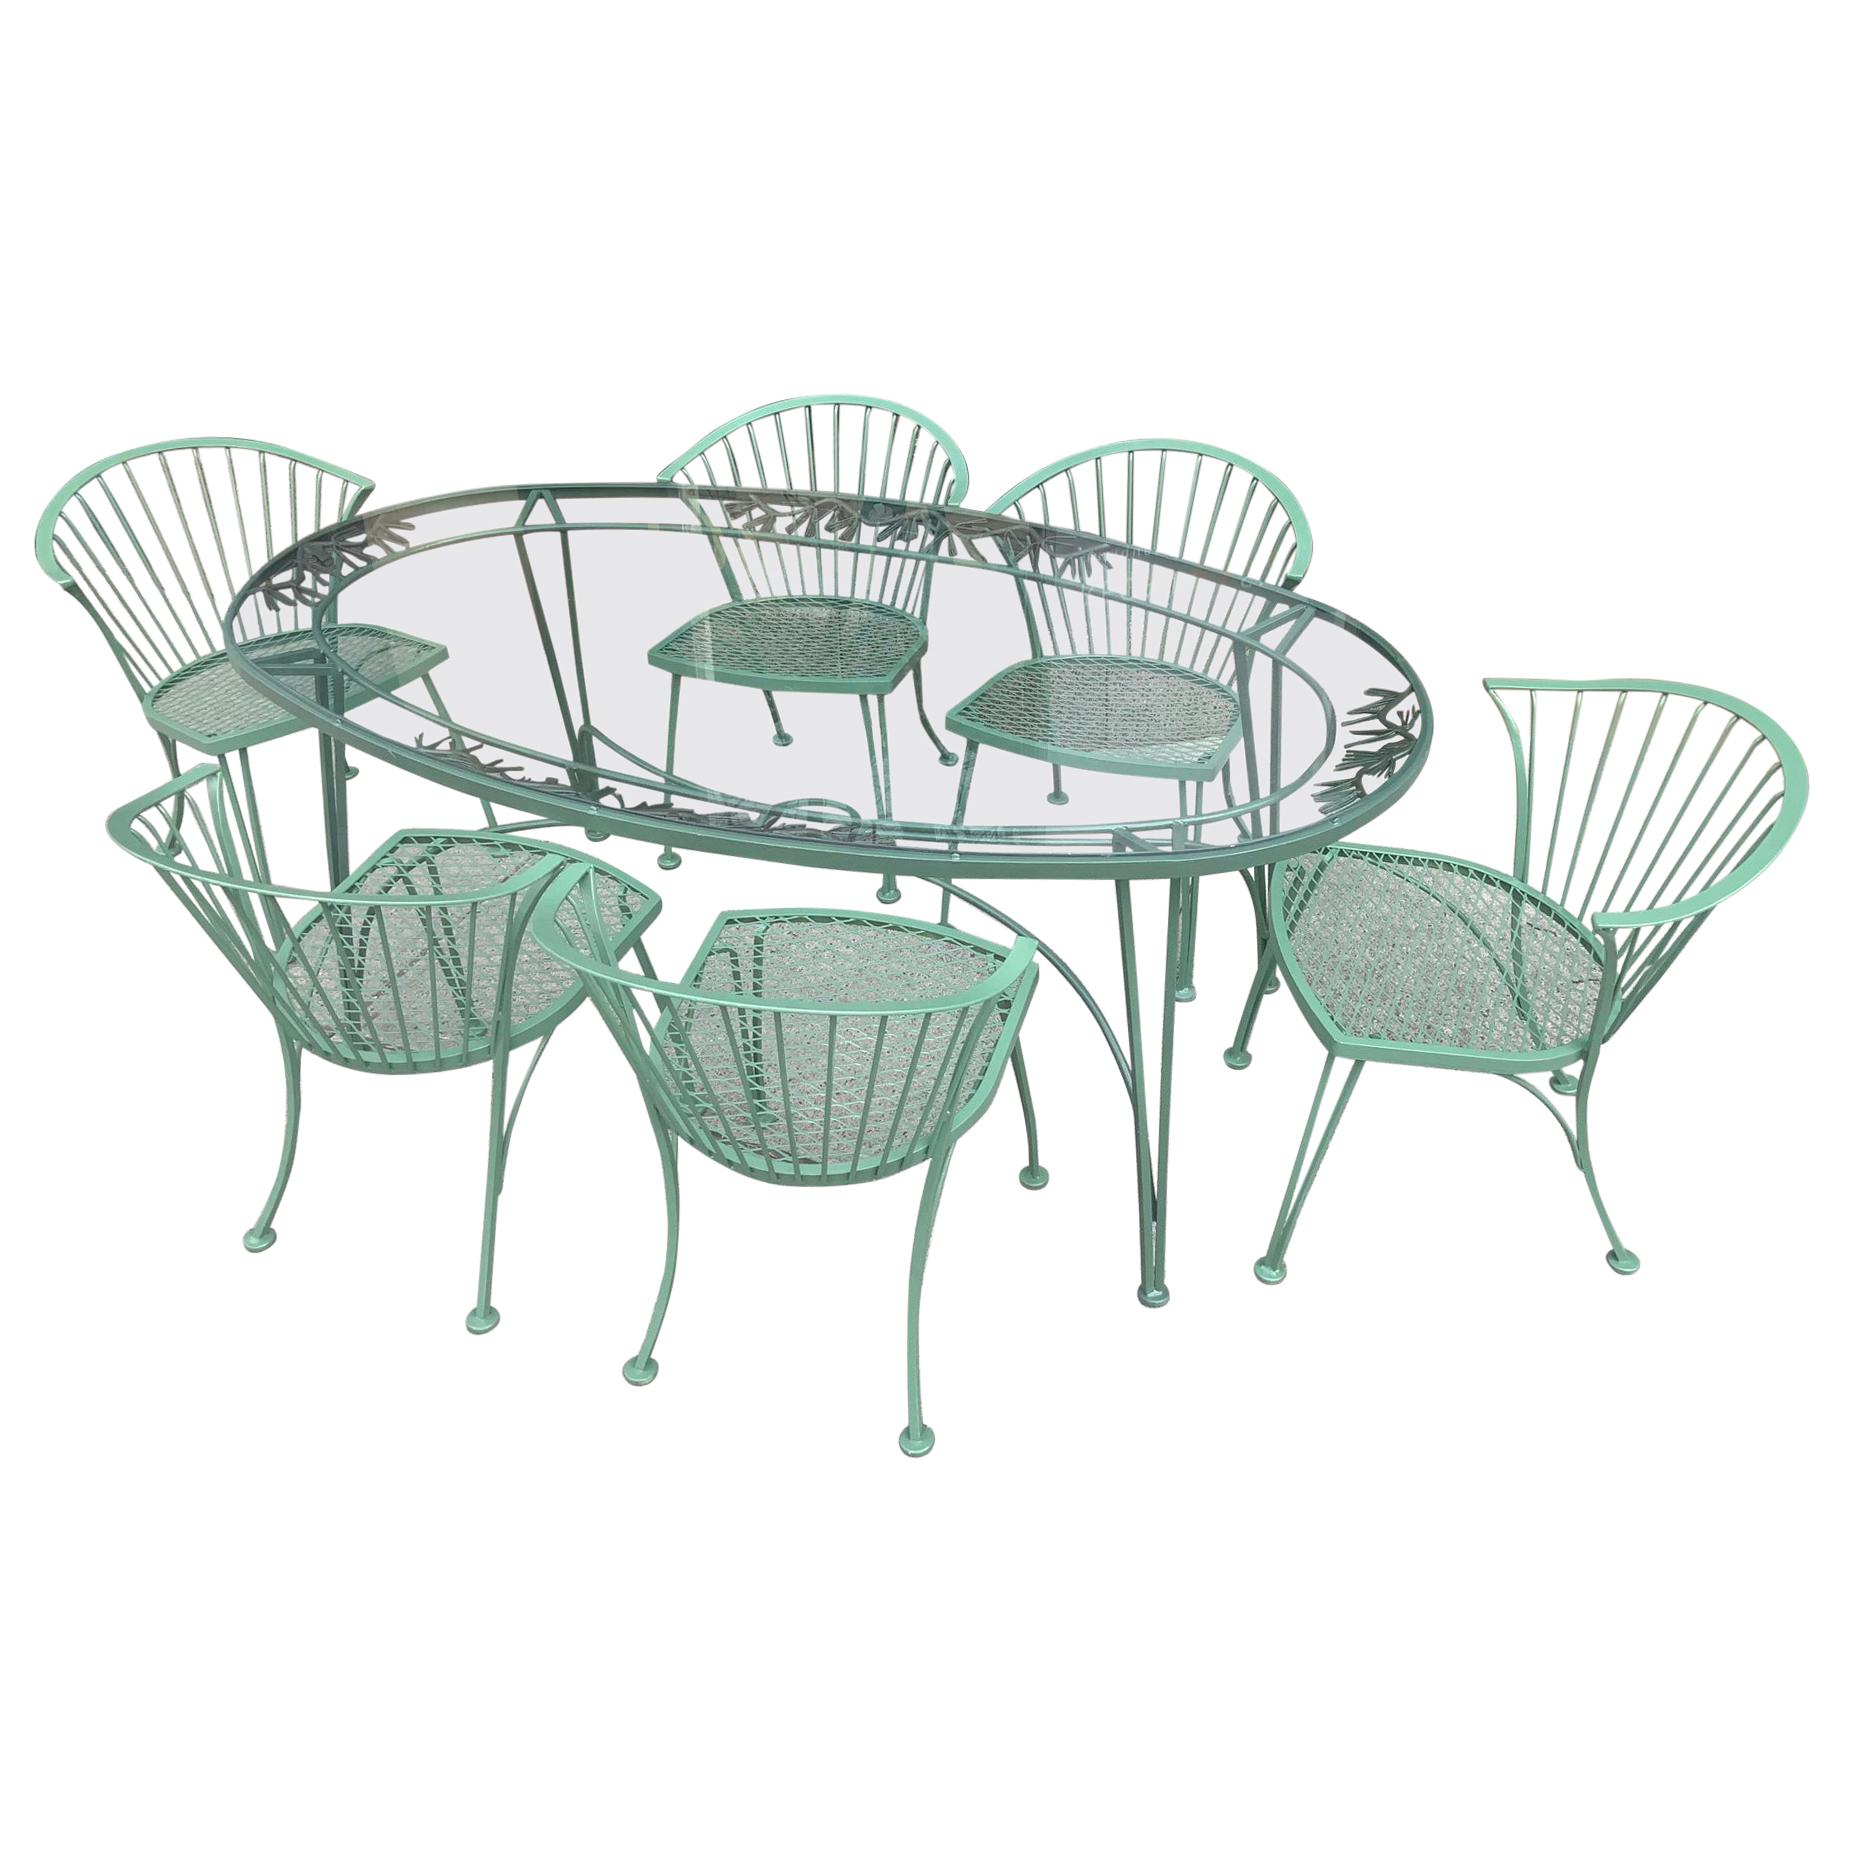 Woodard 'Pinecrest' Garden Set with Six Chairs and Oval Table